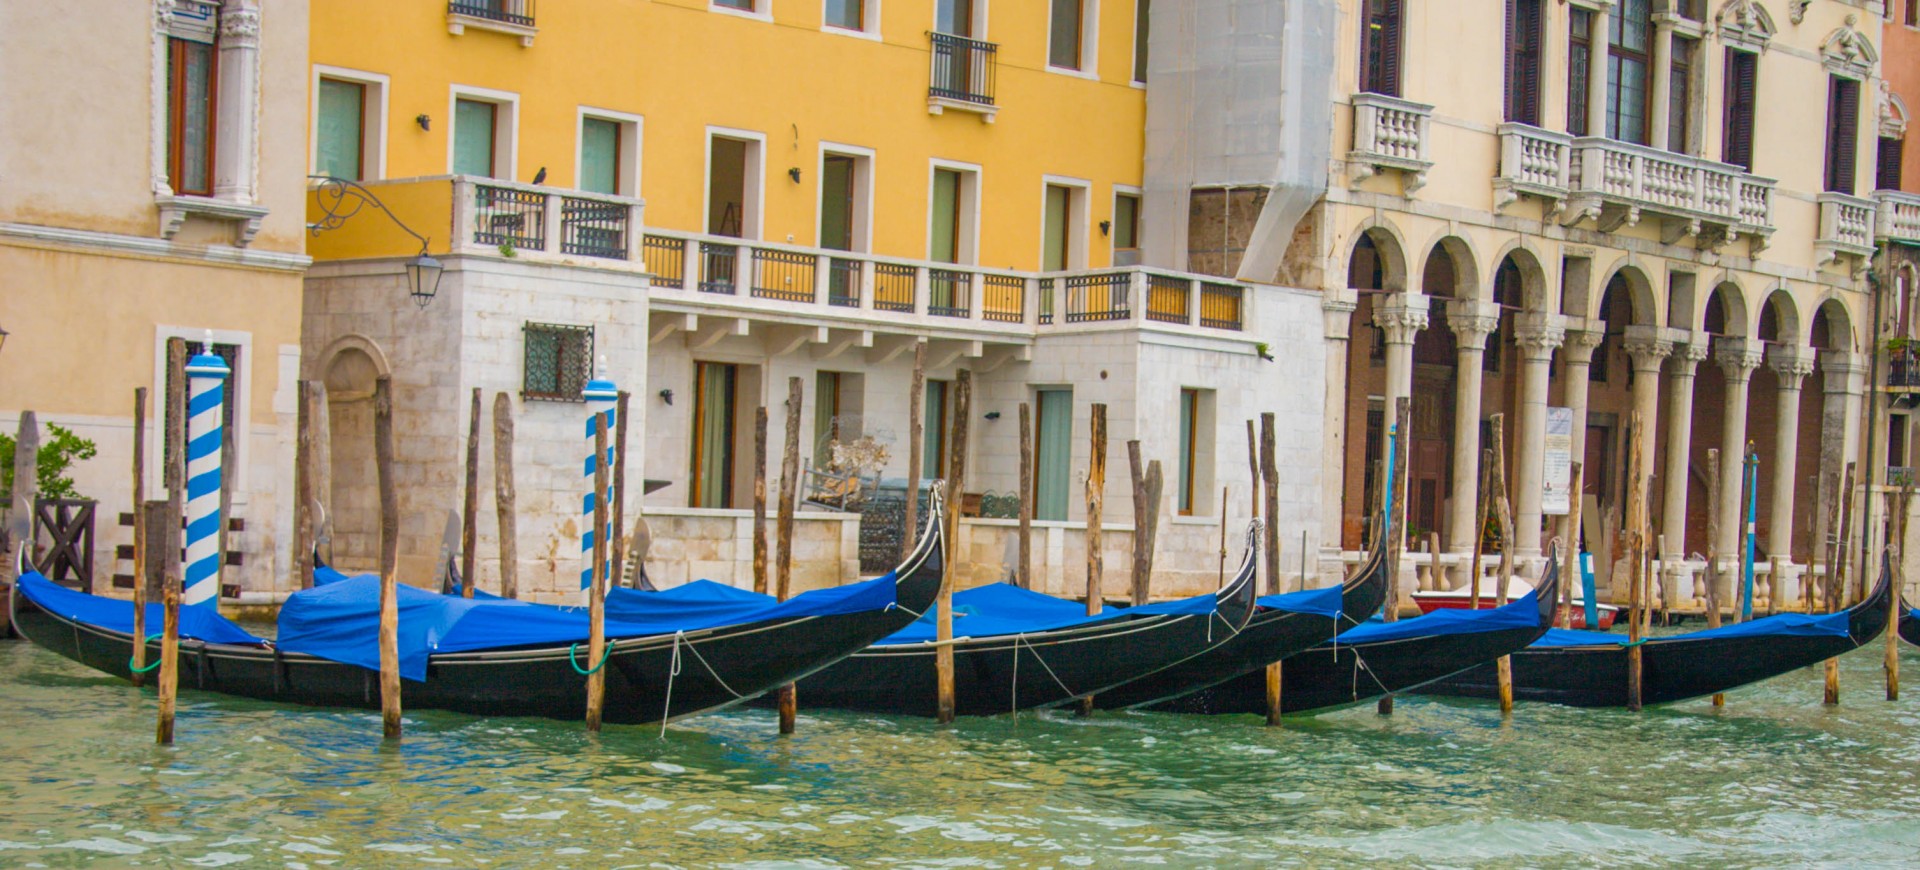 Gondolas parked in a line next to colourful buildings in Venice, Italy - Lost in Venice